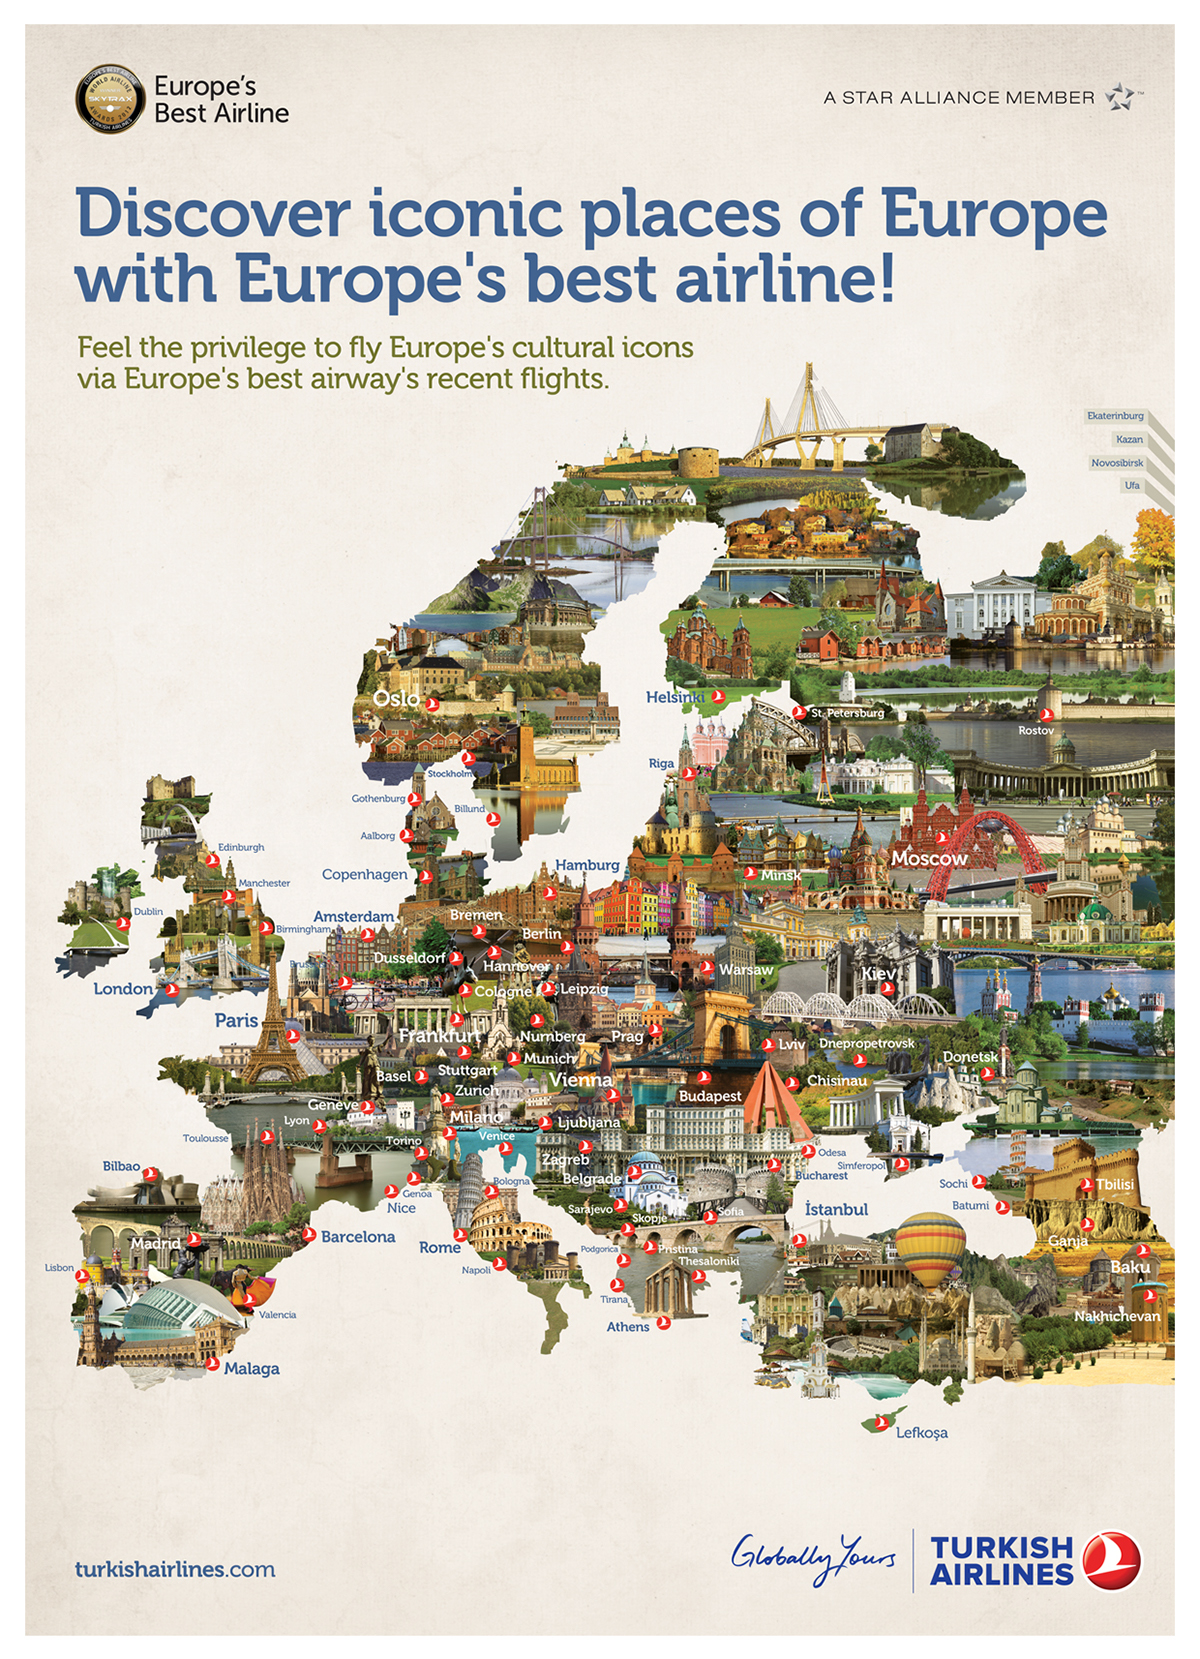 Turkish Airlines Europe print continent map 